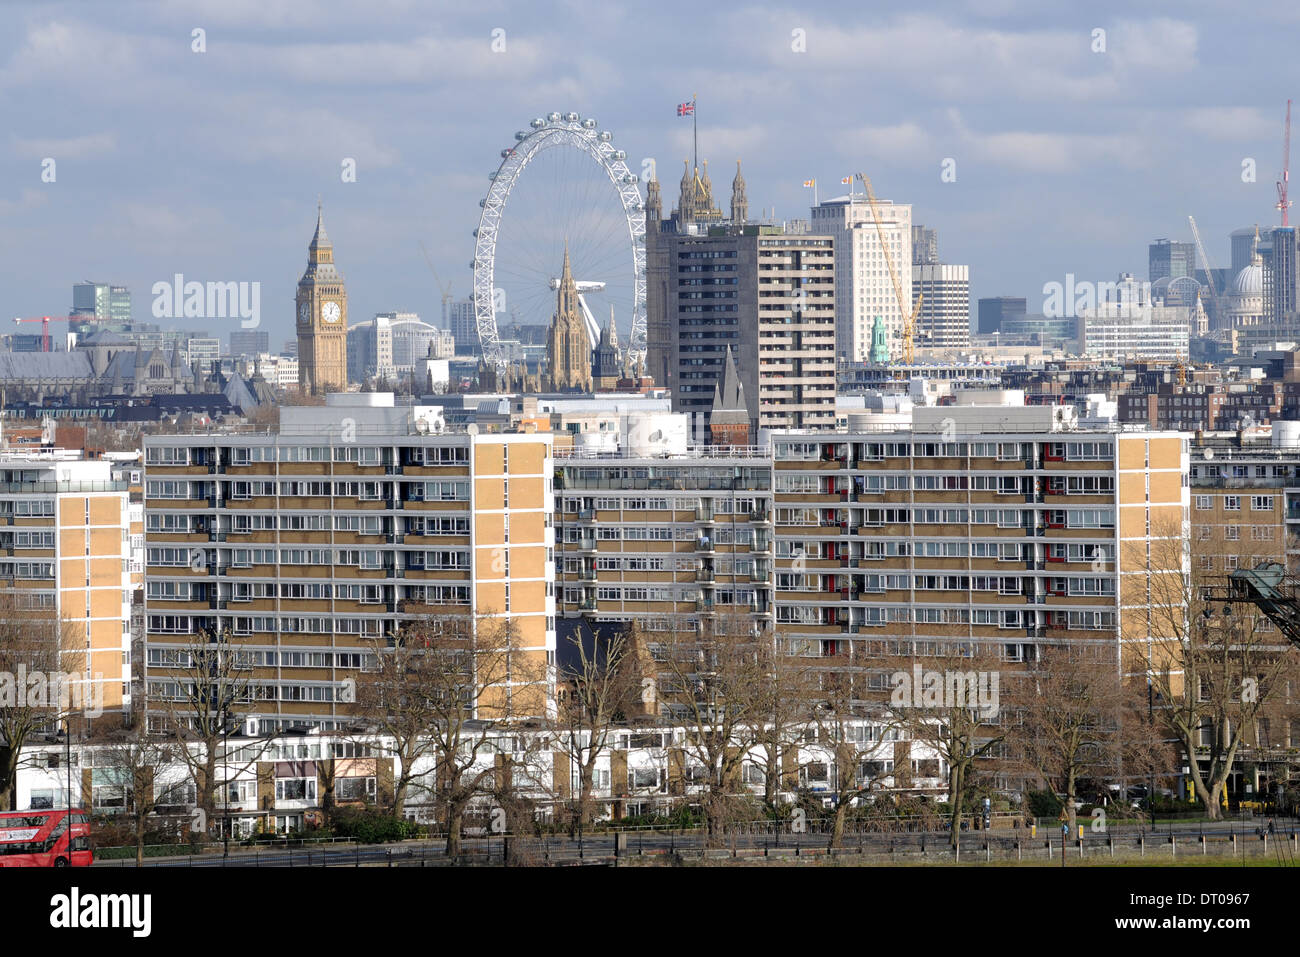 London skyline by day with a view of the main landmarks Stock Photo